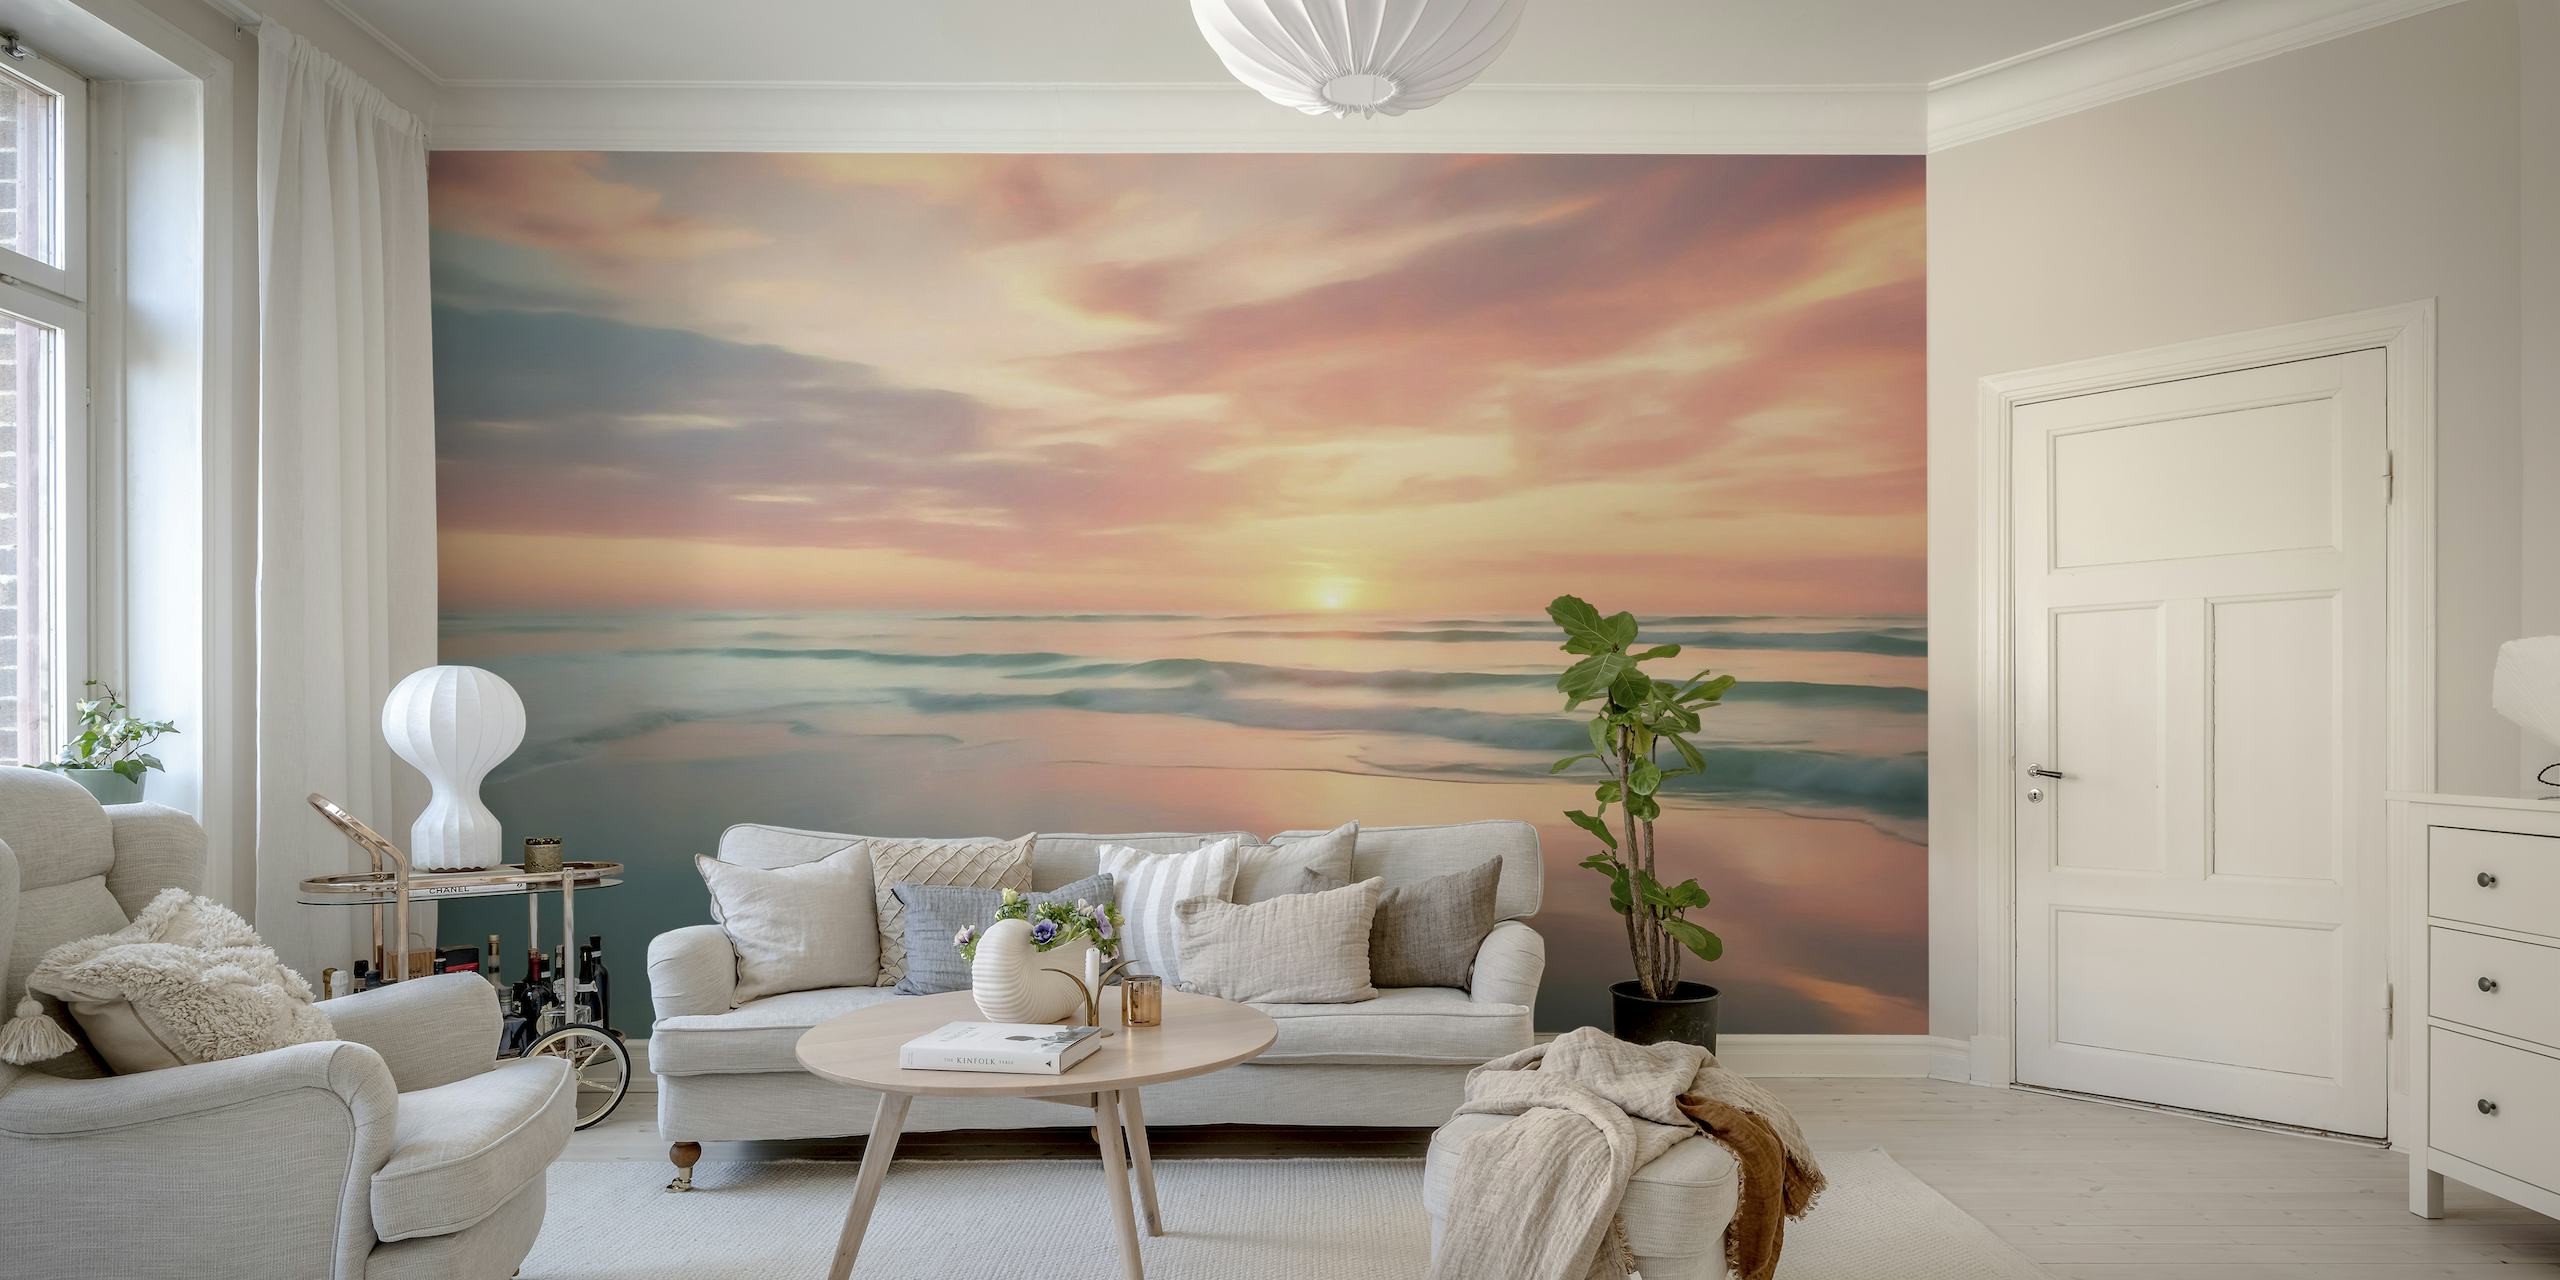 Blurred sunset over the ocean with reflection papel pintado